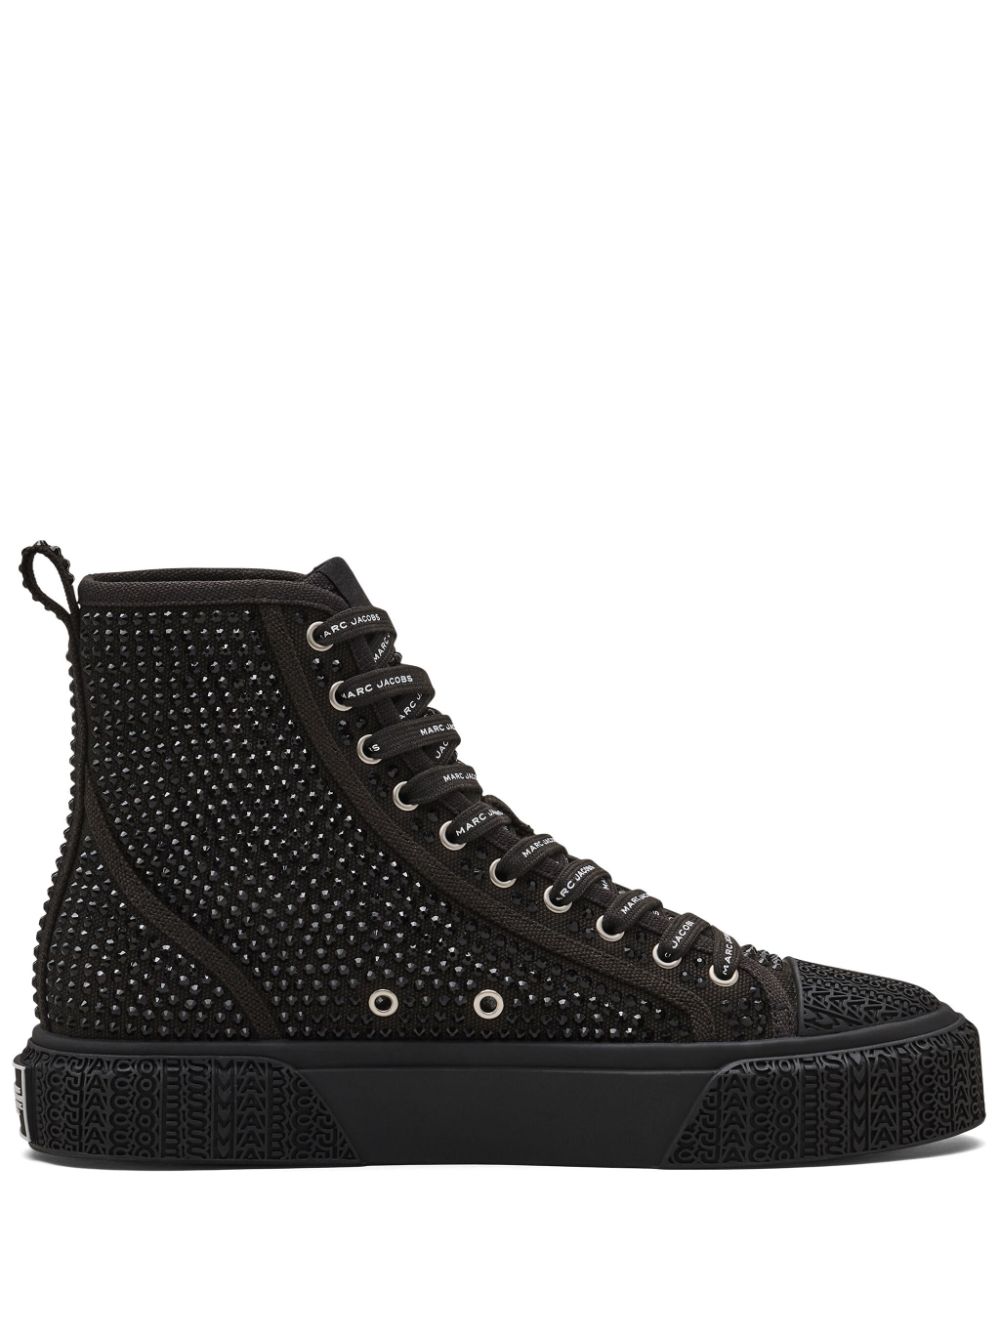 The Crystal Canvas high-top sneakers